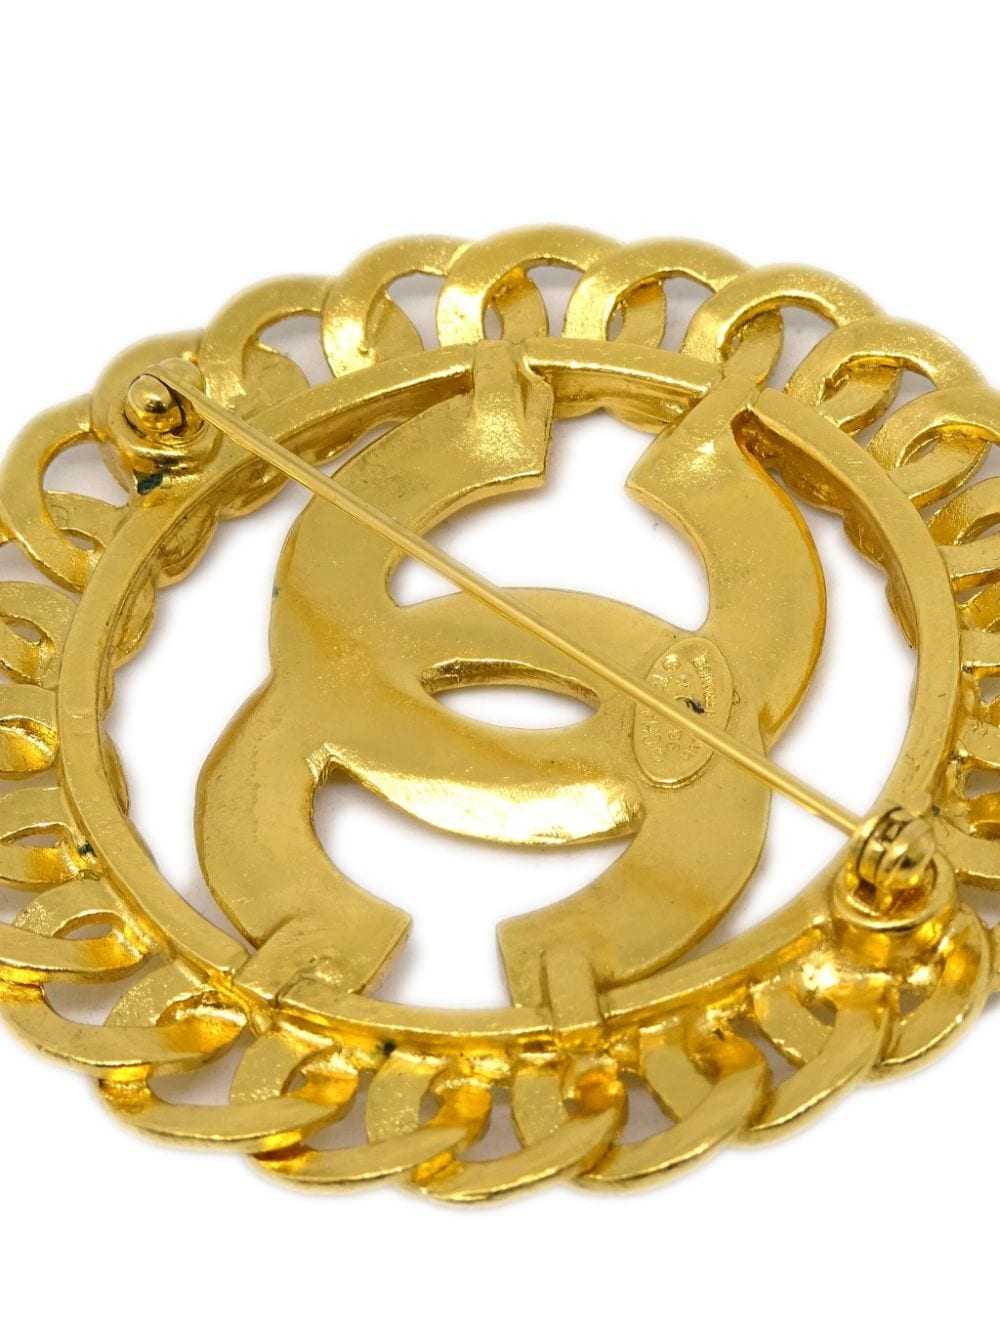 CHANEL Pre-Owned 1996 Medallion gold-plated brooch - image 3